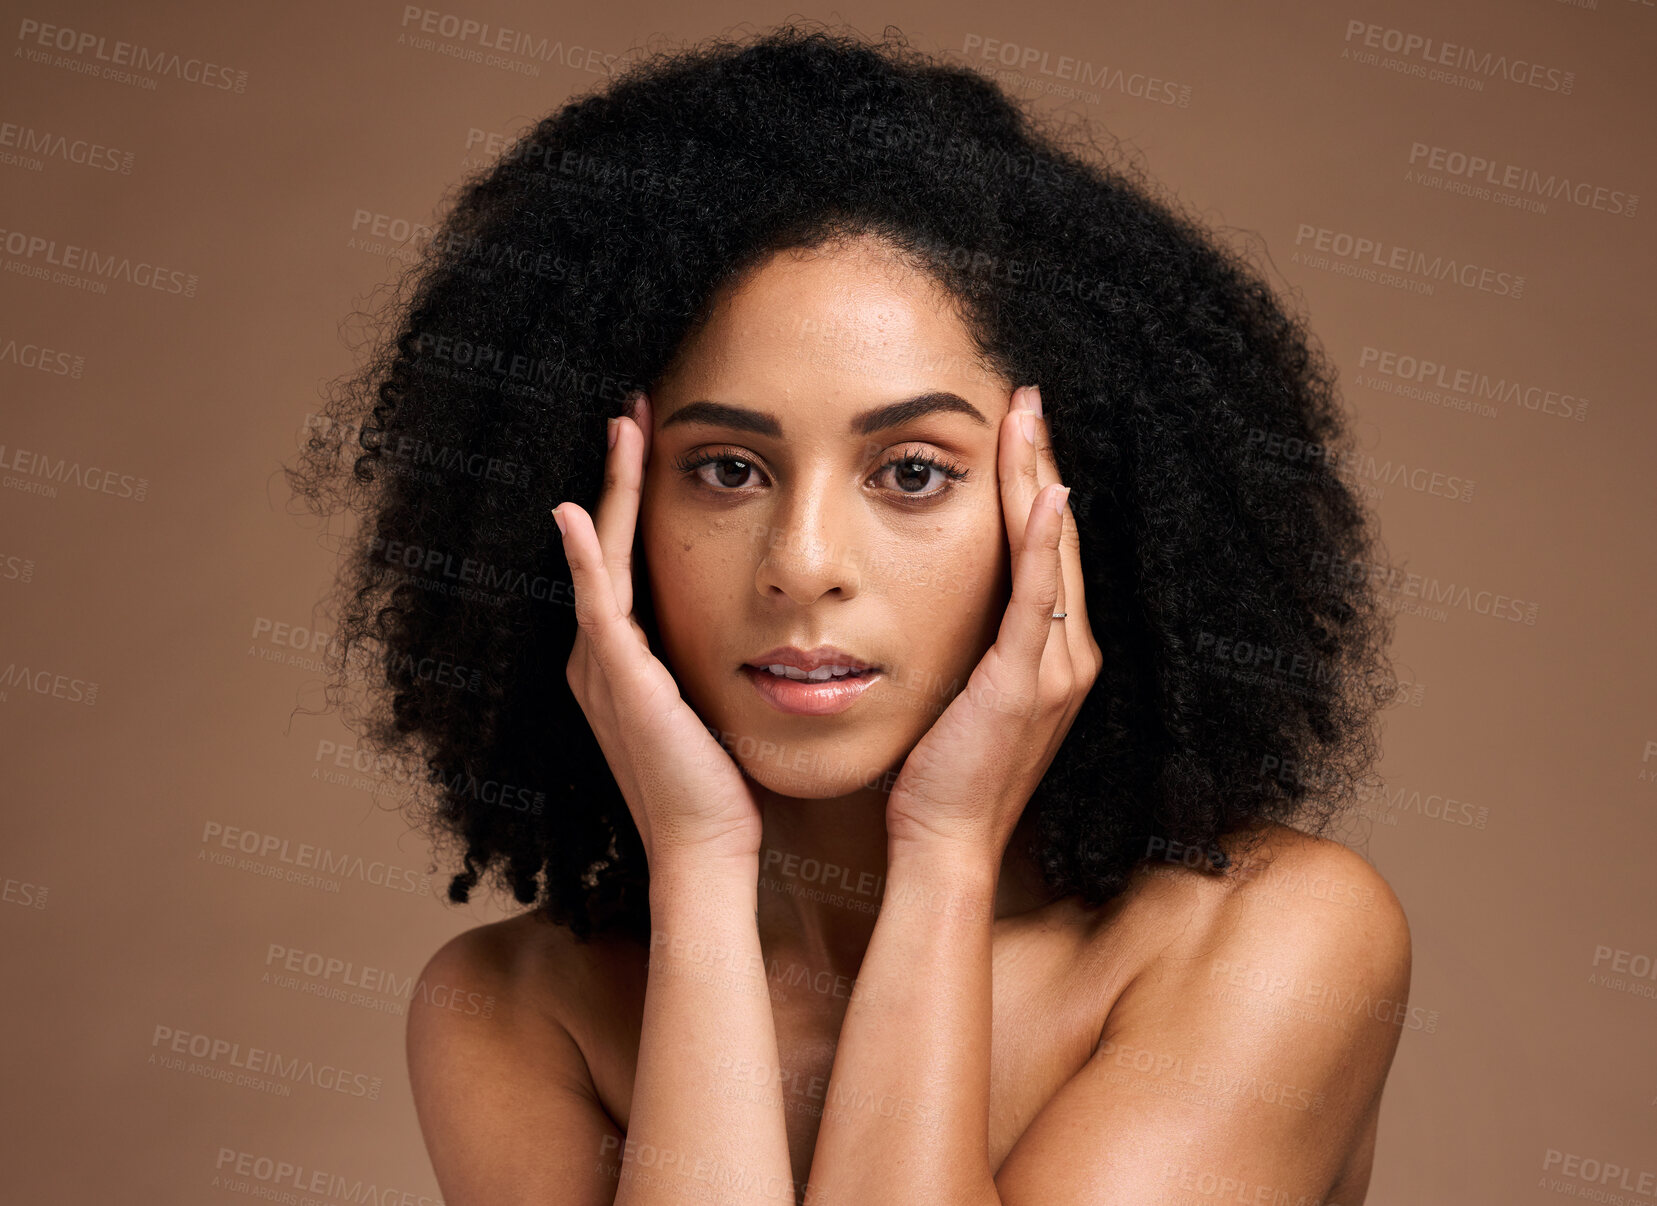 Buy stock photo Skincare, afro and hair portrait of black woman with healthy aesthetic and natural texture. African grooming cosmetics model girl face with beautiful skin glow in brown studio background.

